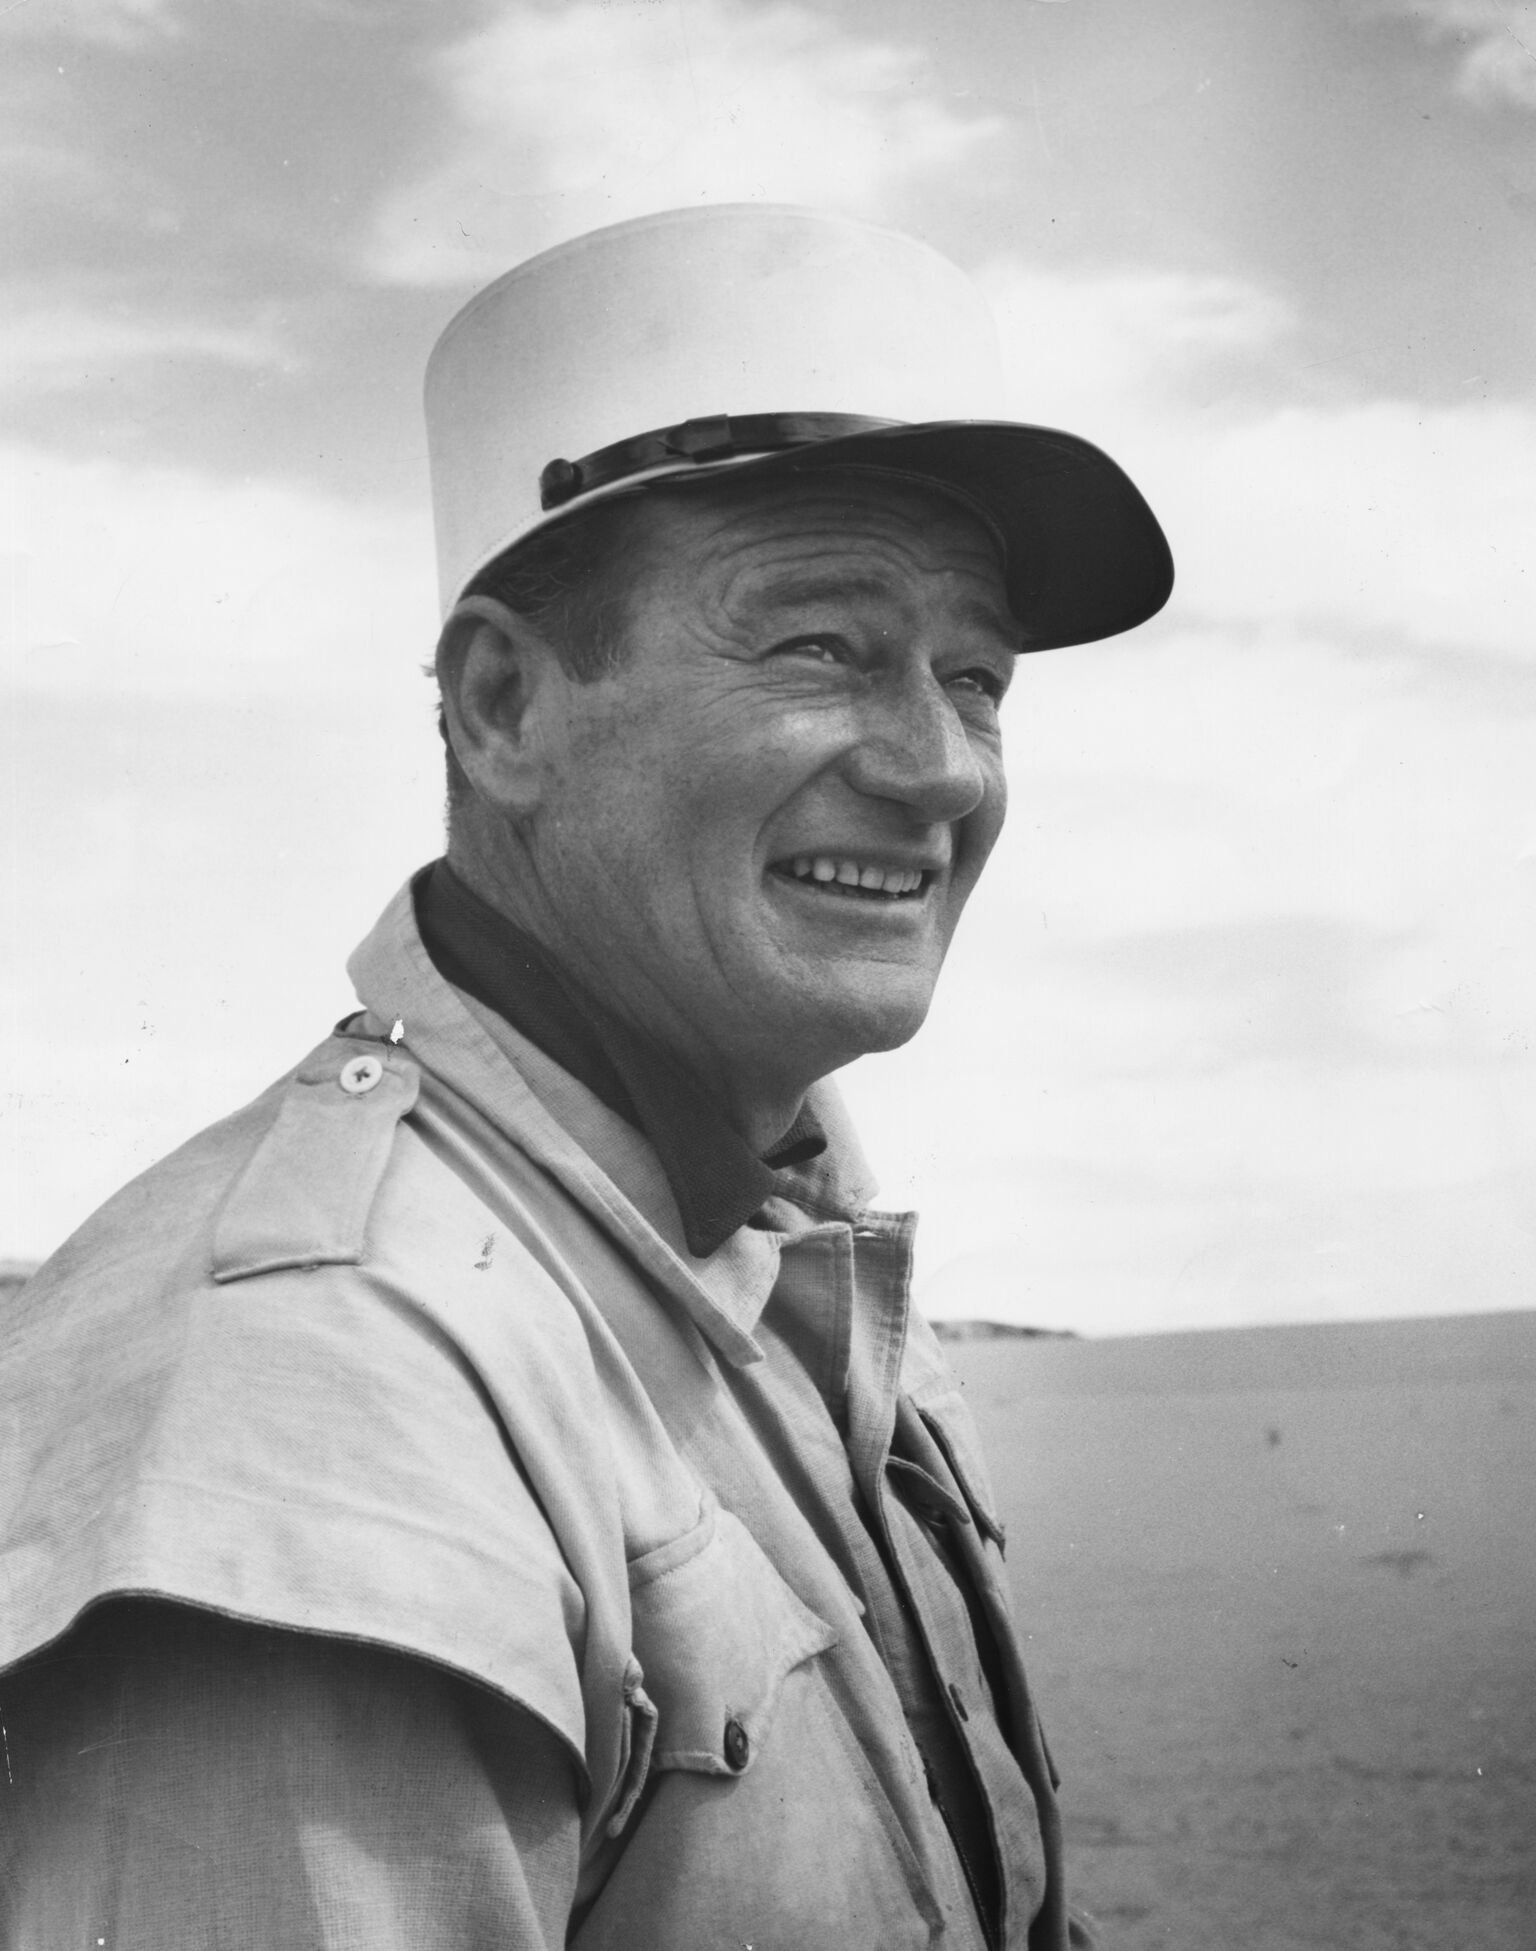 John Wayne in costume, standing in a desert landscape filming the movie "Legend of the Lost" | Getty Images